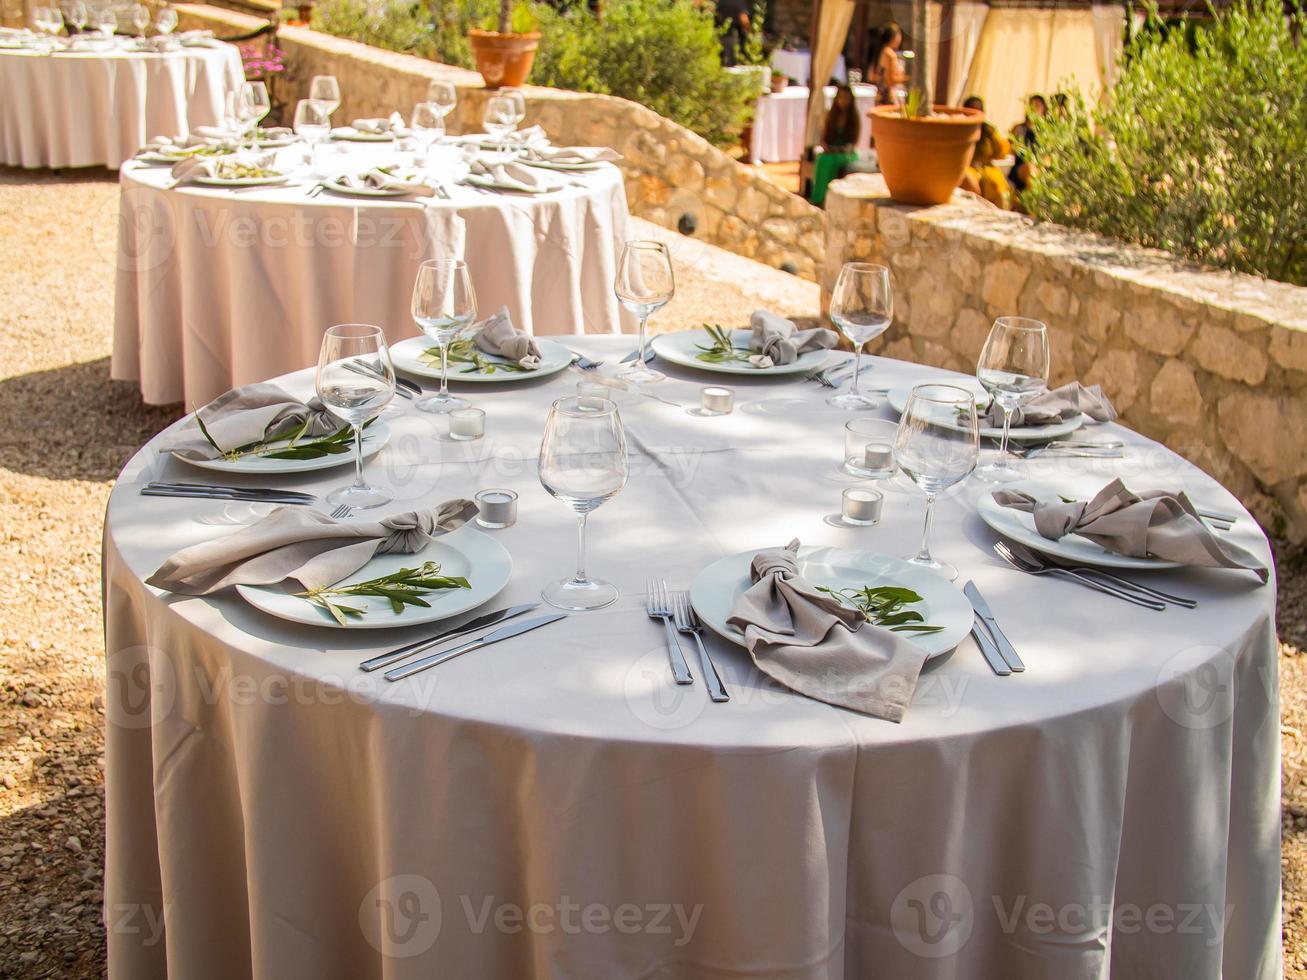 Beautiful outdoor wedding decoration in city. Candles and dried flowers and accessories with bouquets and glasses on table with linen tablecloth on newlywed table on green lawn photo